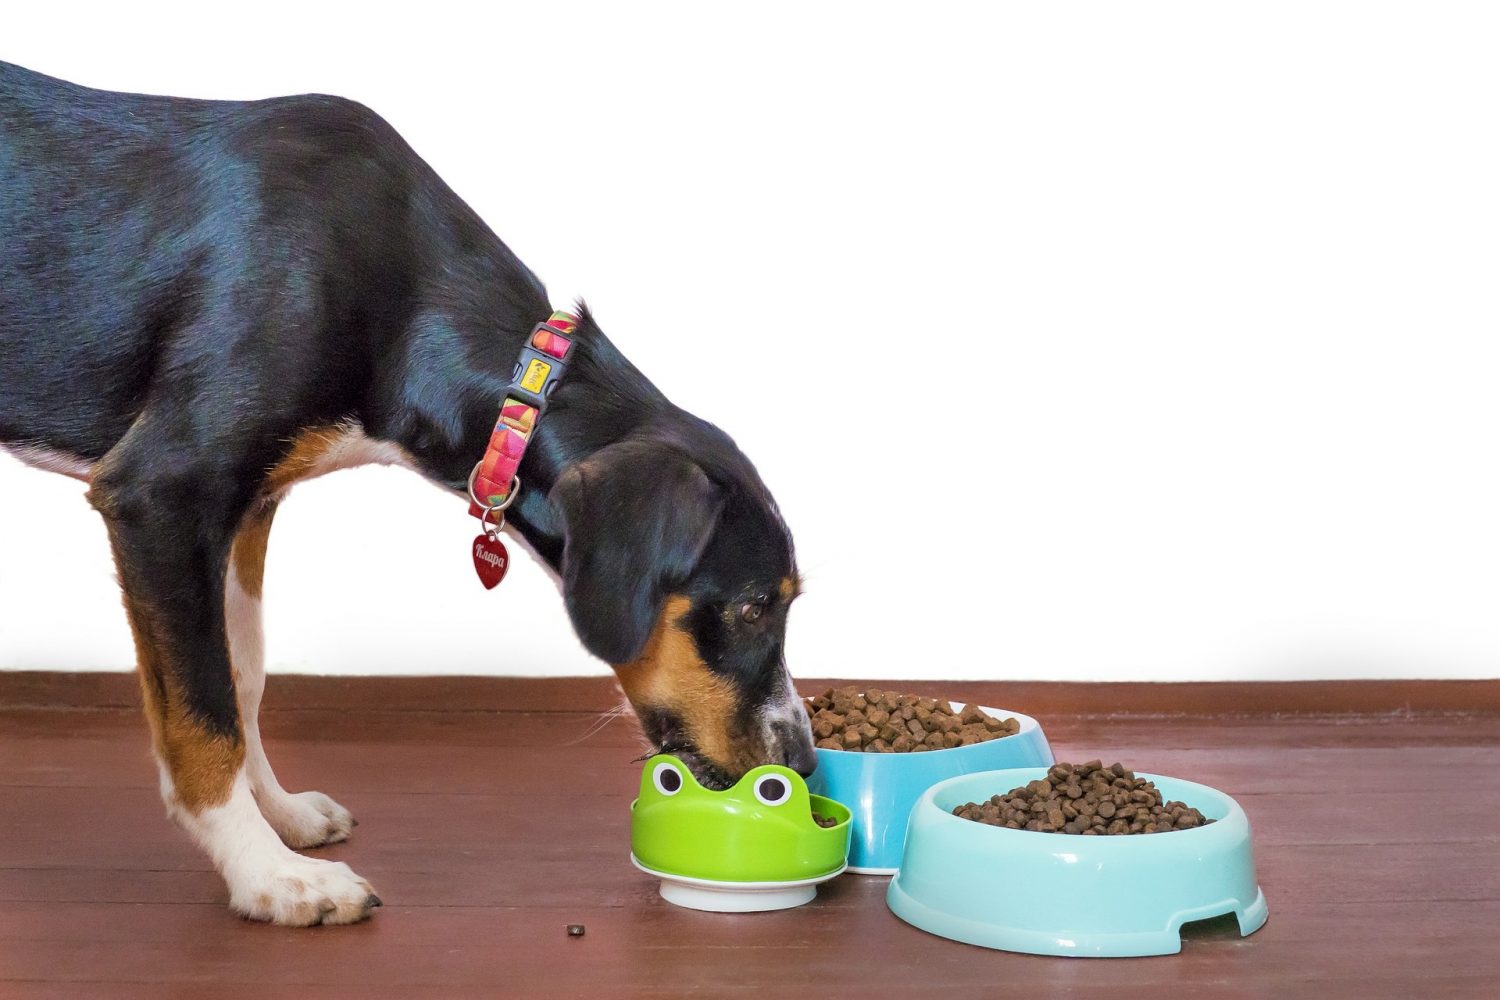 Vegan Diets May Be The Healthiest to Feed Pet Dogs, Say Researchers